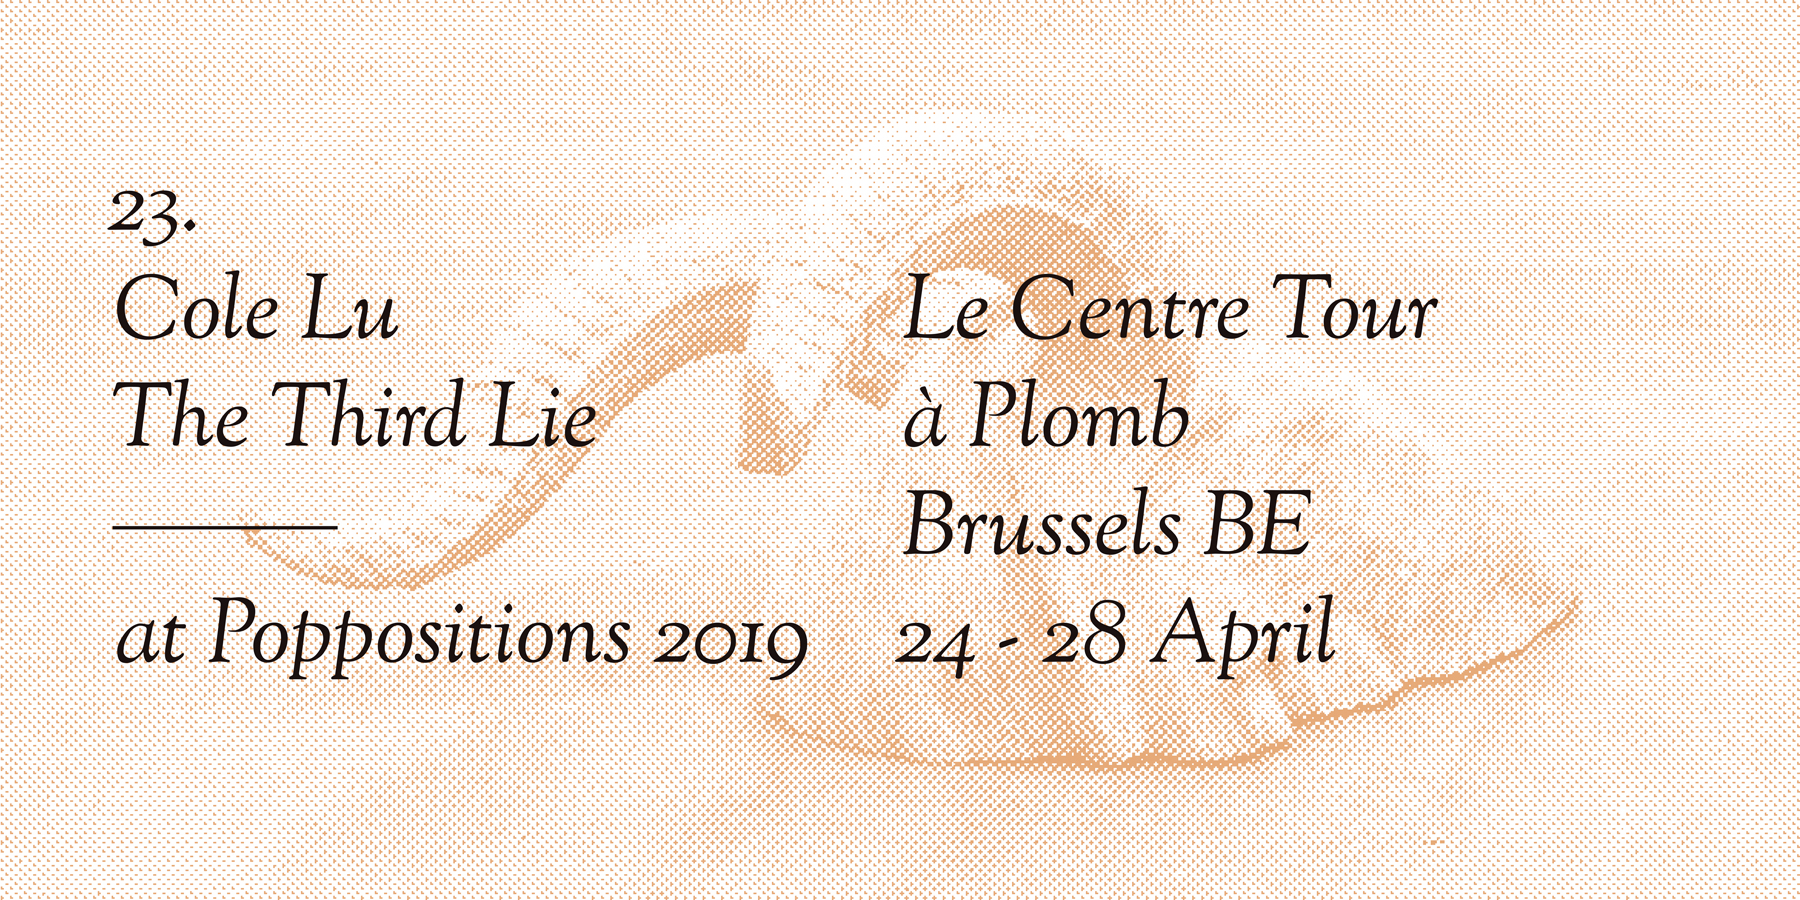 Cole Lu, Poppositions 2019, Brussels